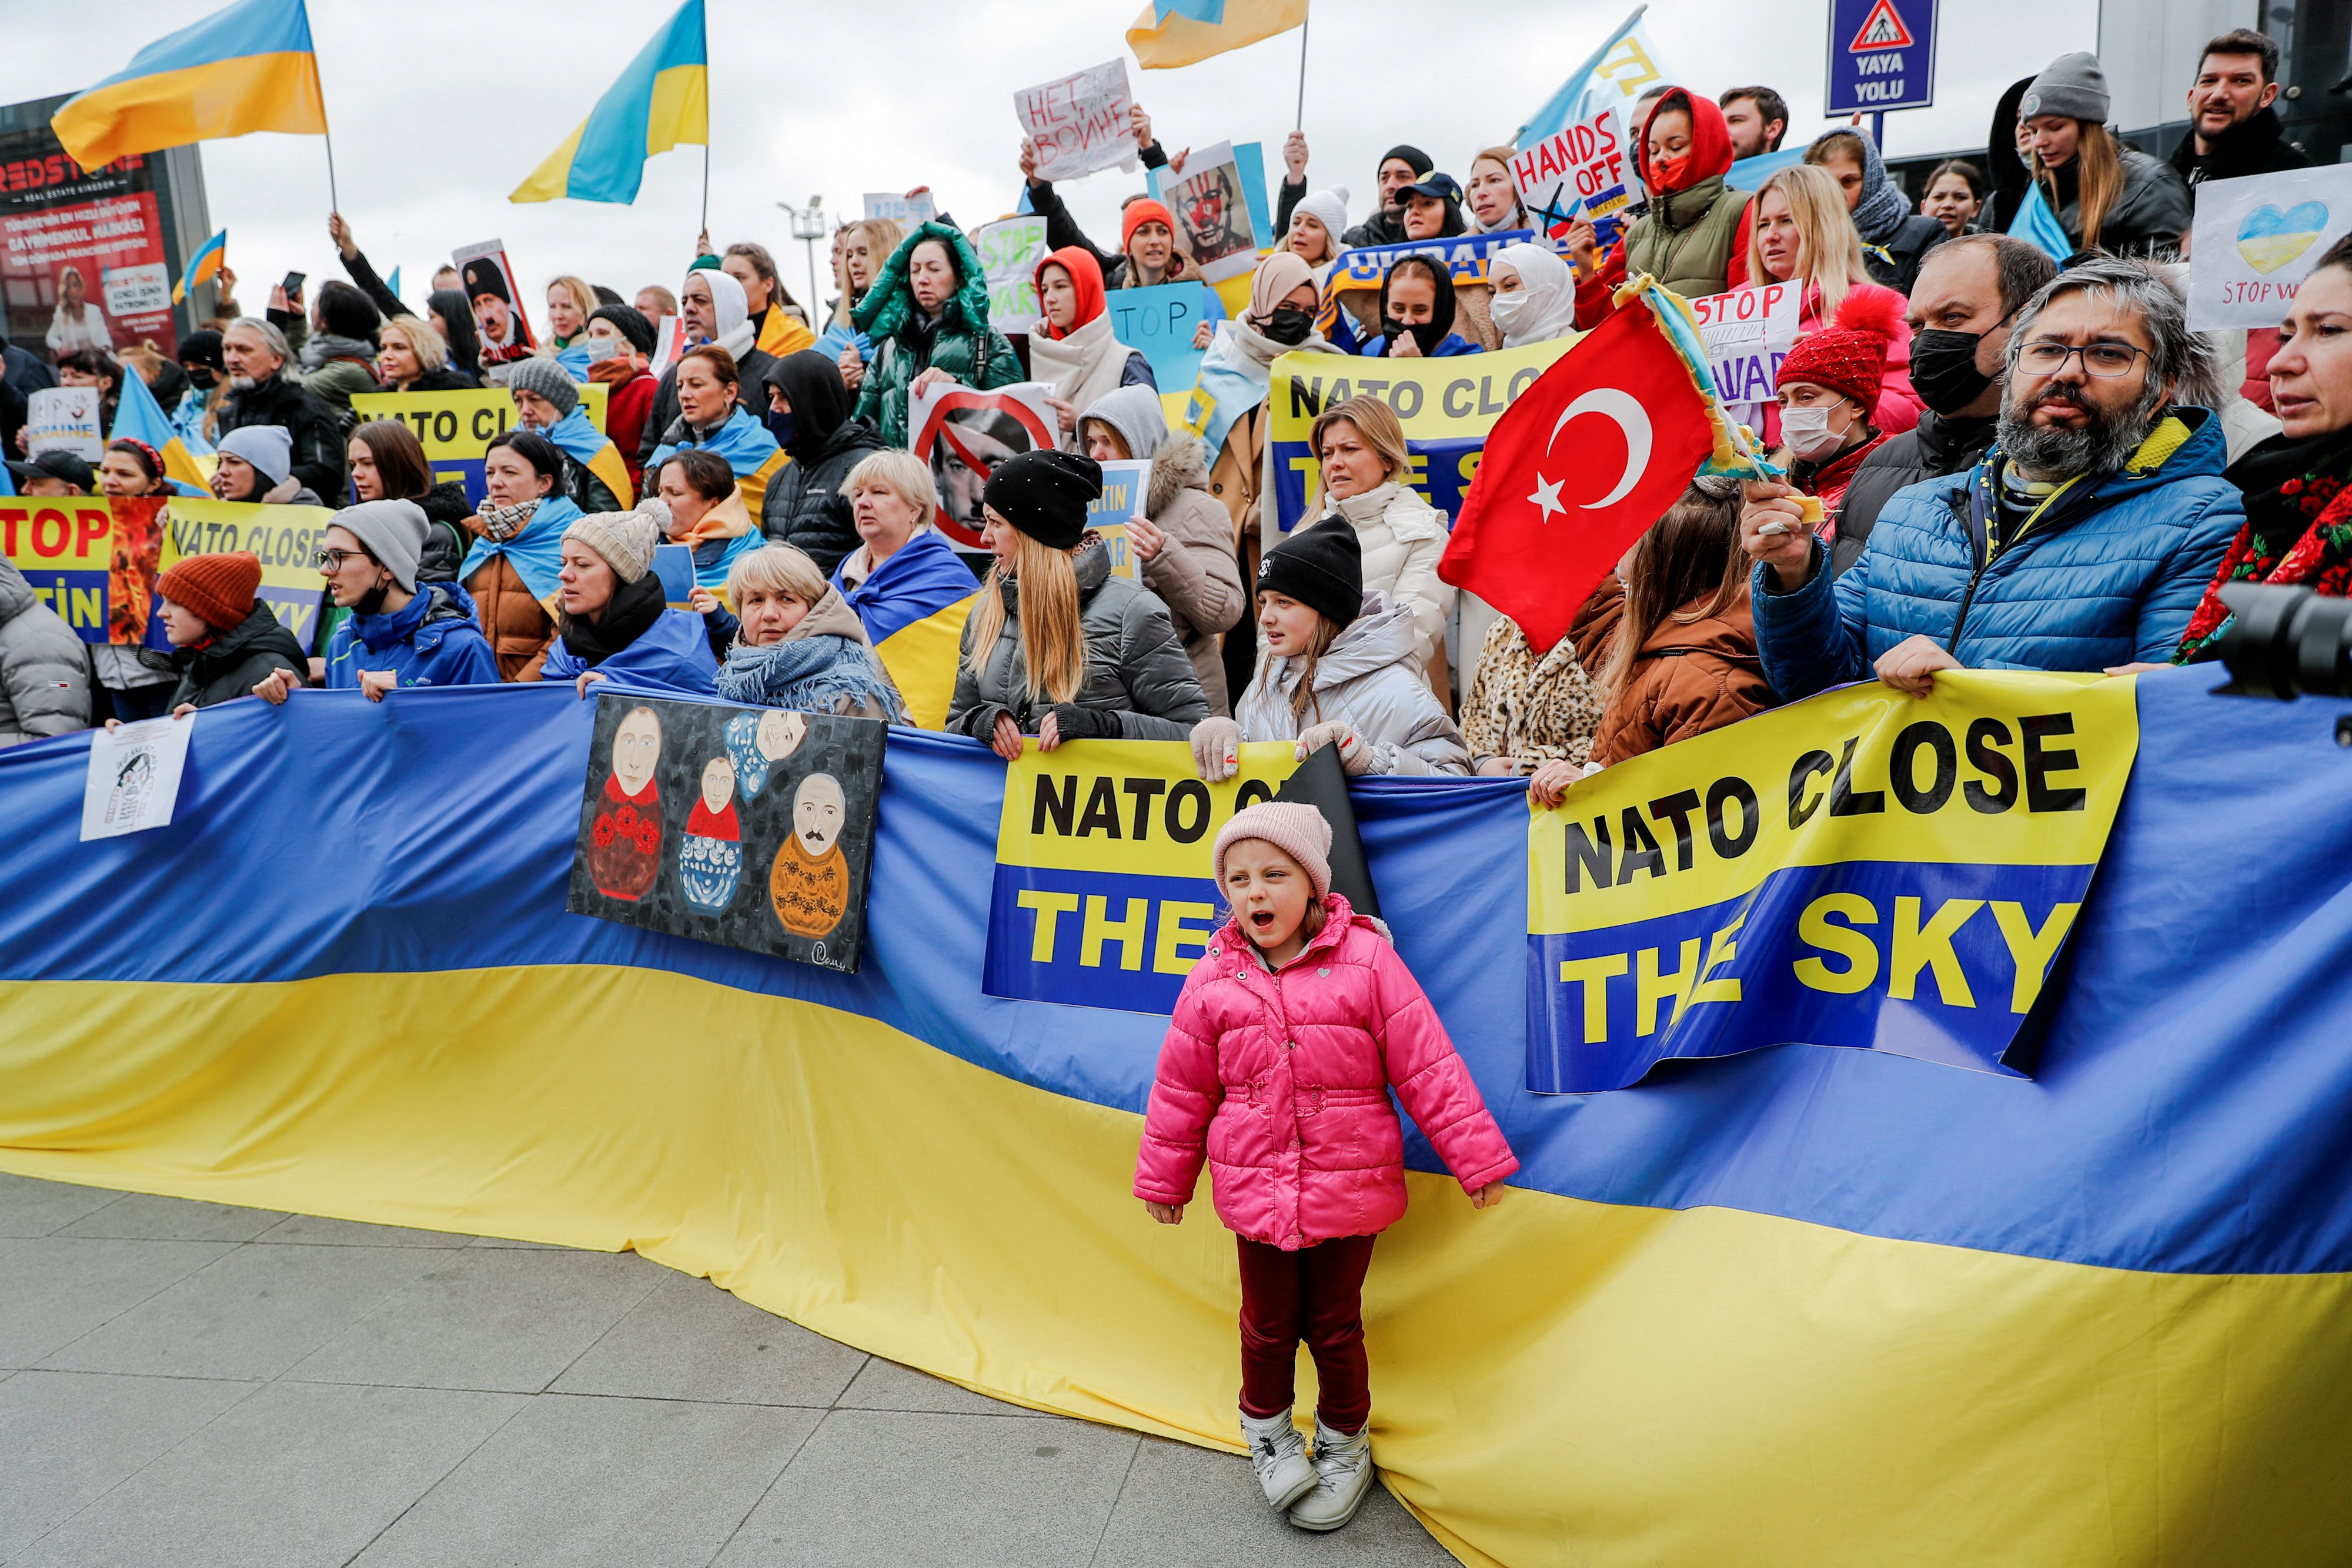 People take part in a protest against the Russian invasion of Ukraine, in Istanbul, Turkey.  (REUTERS/Kemal Aslan).